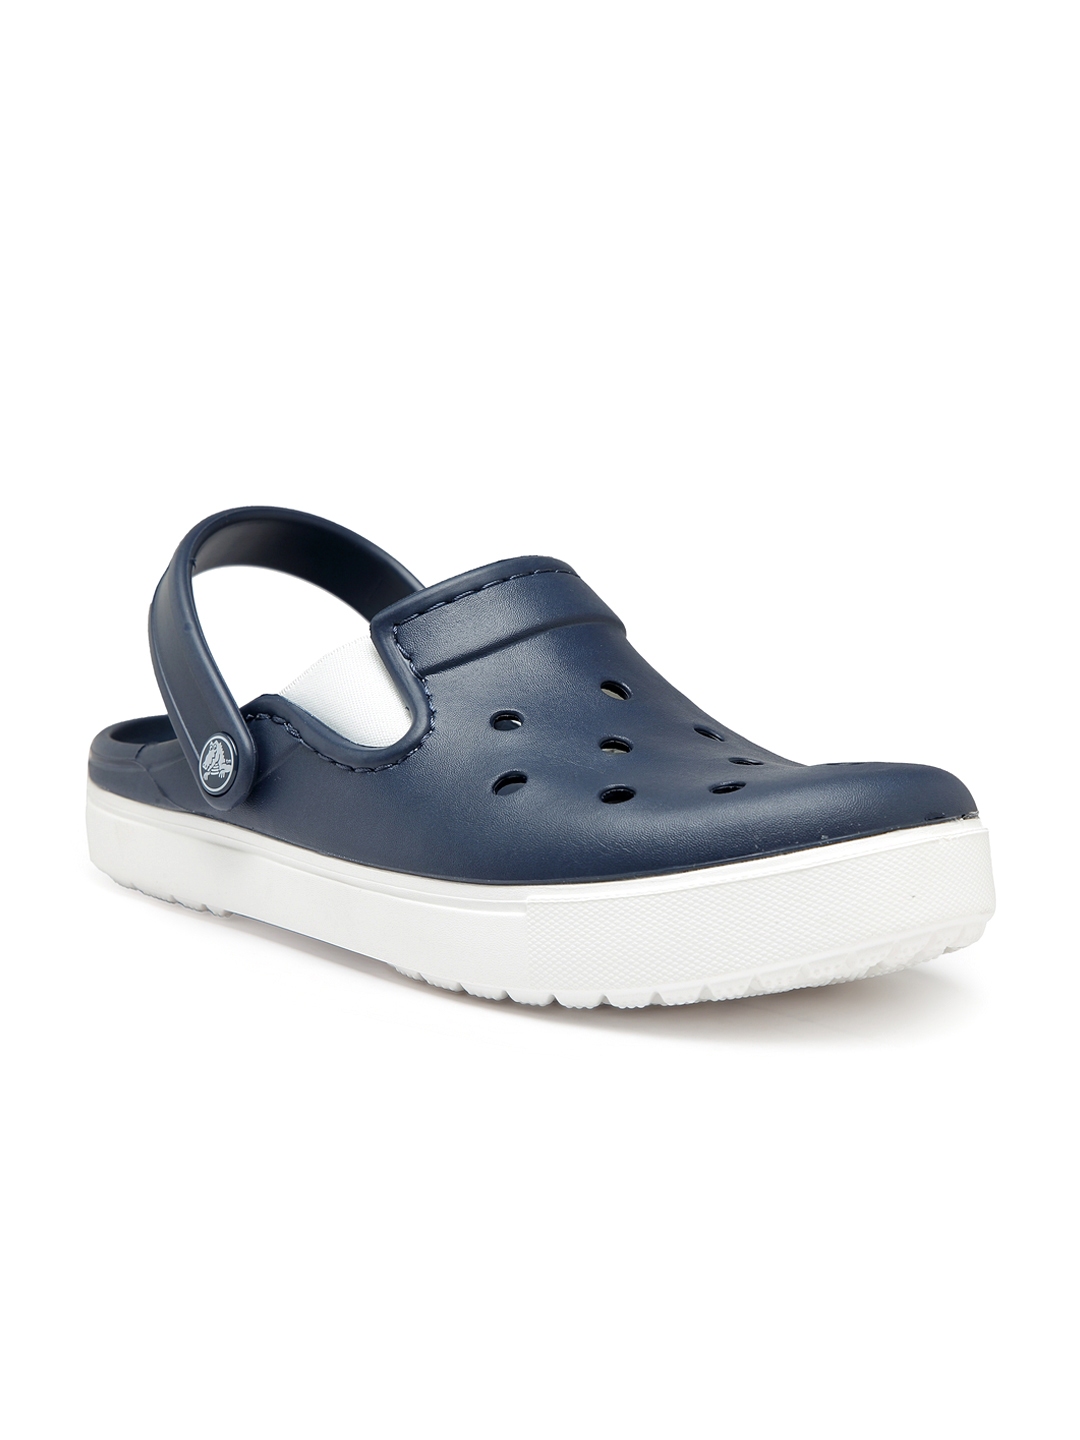 navy blue and white crocs